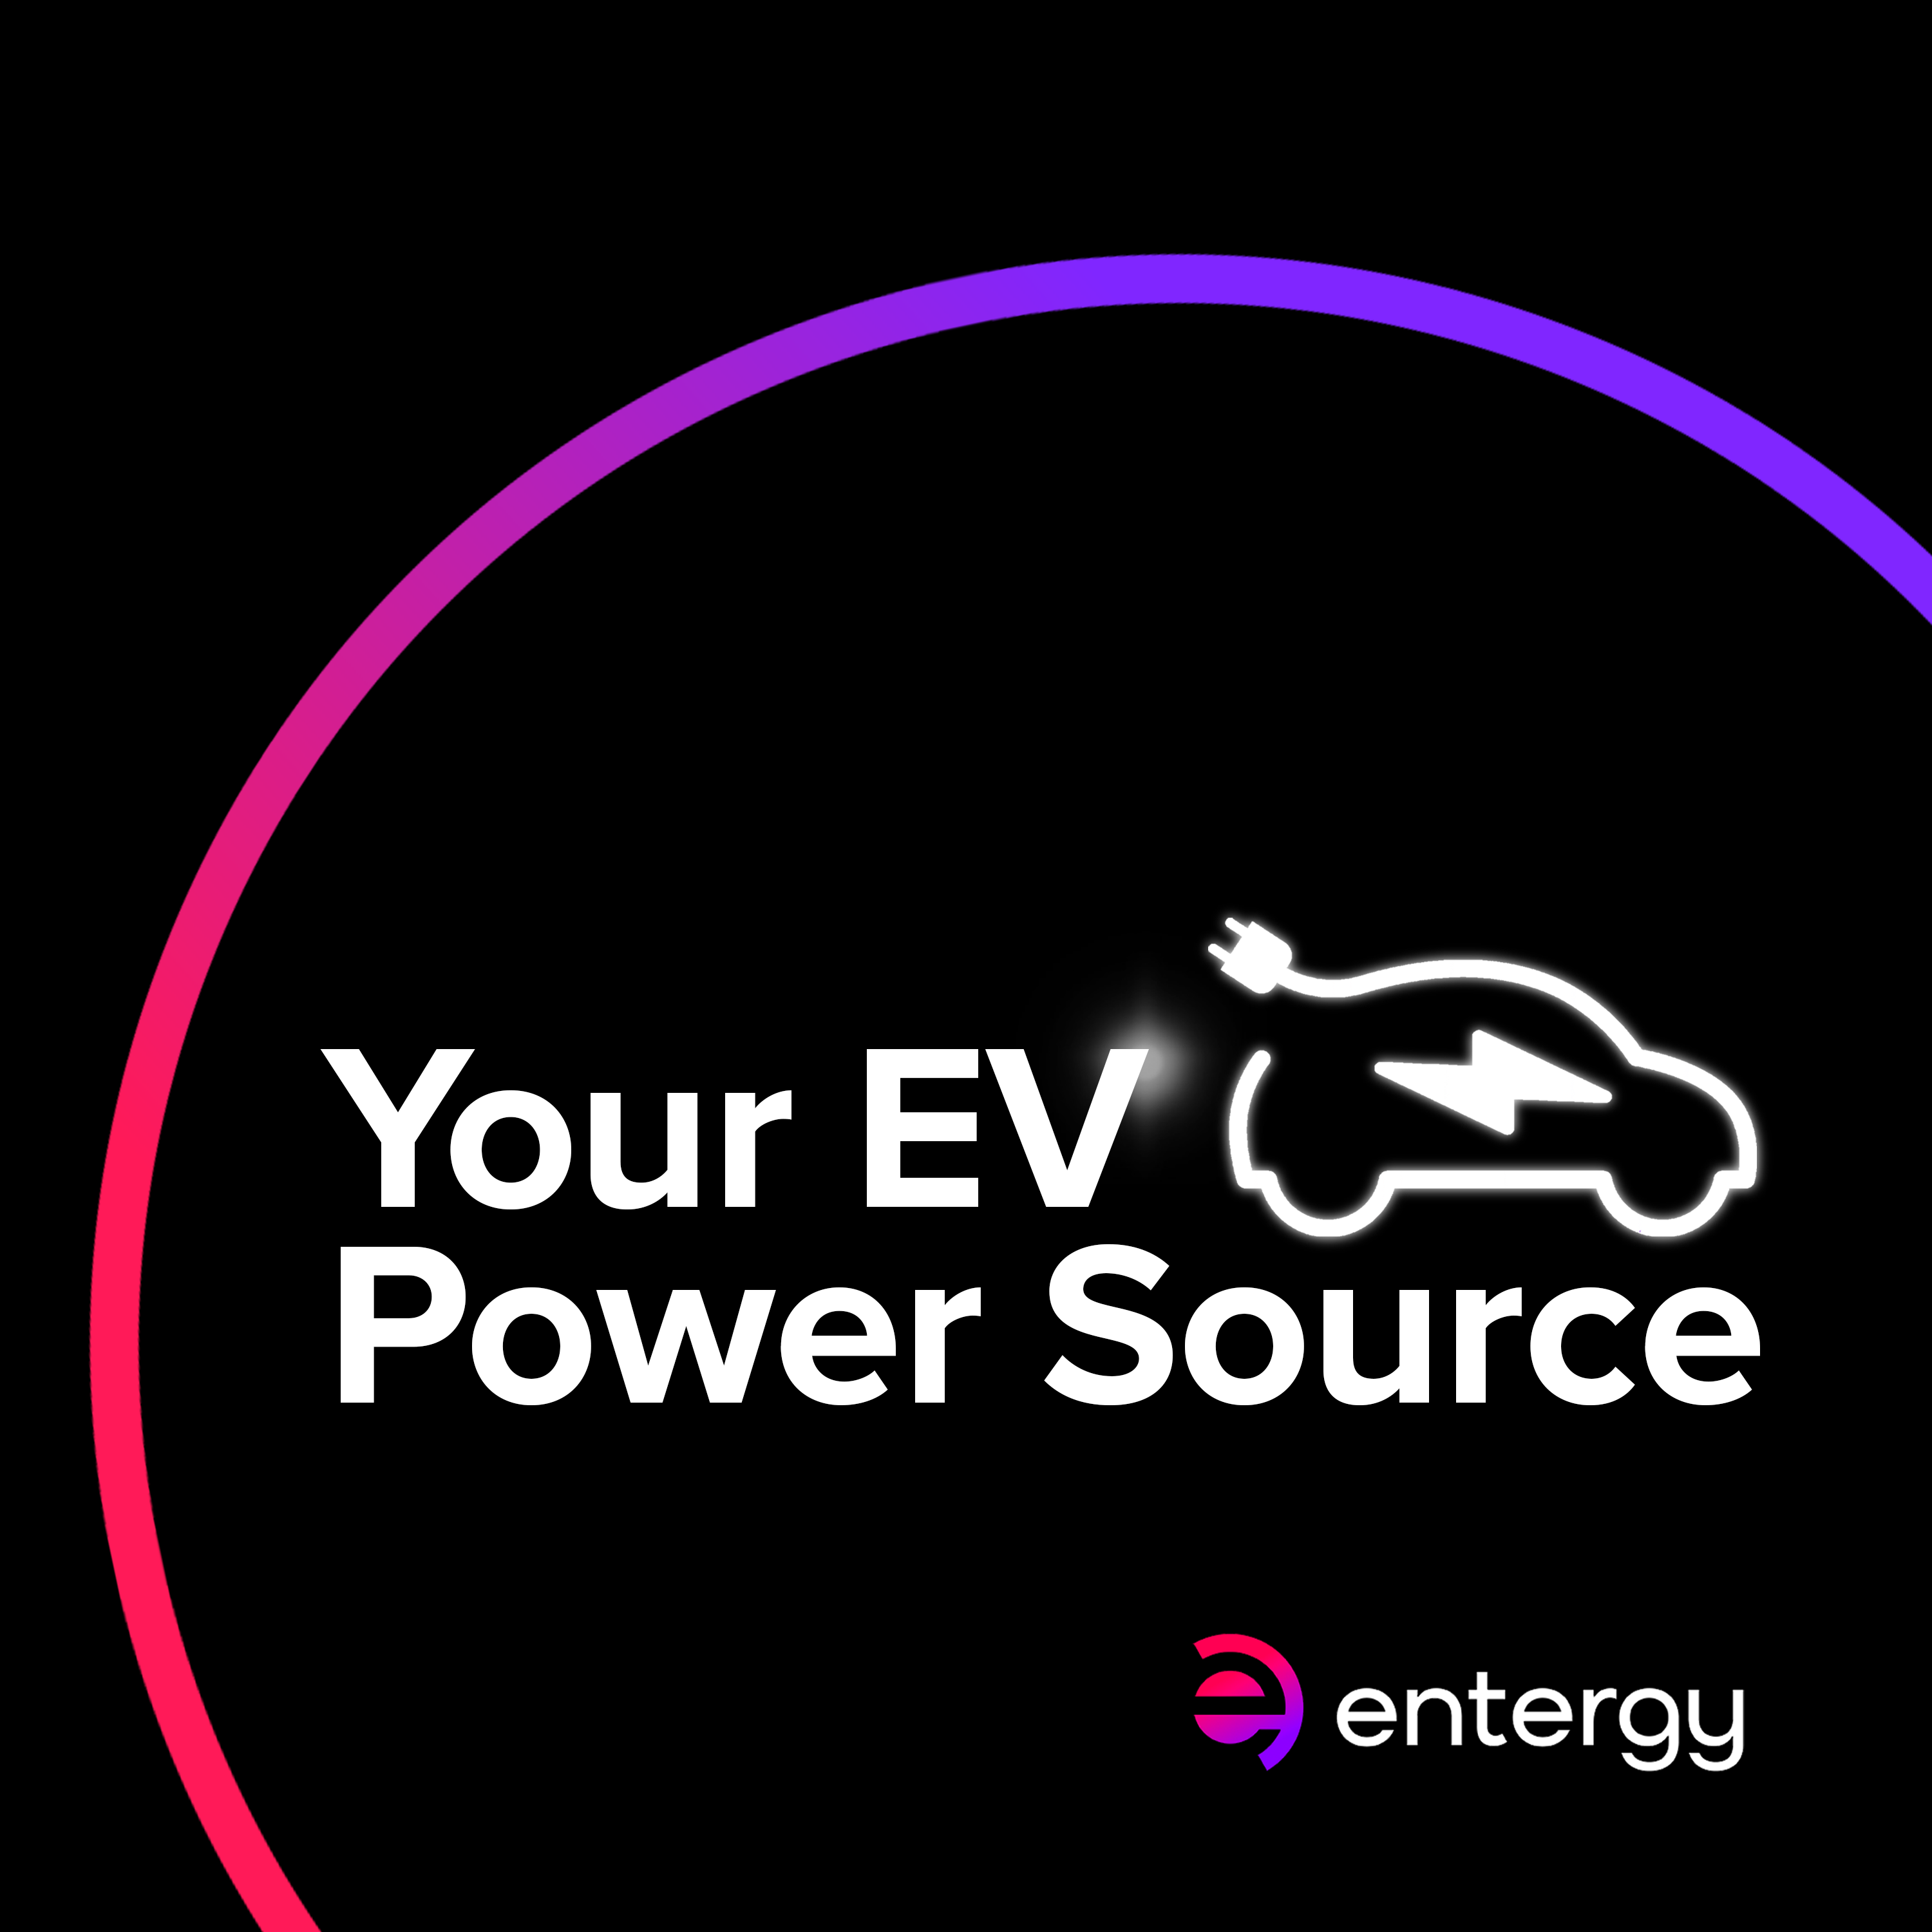 Your EV Power Source